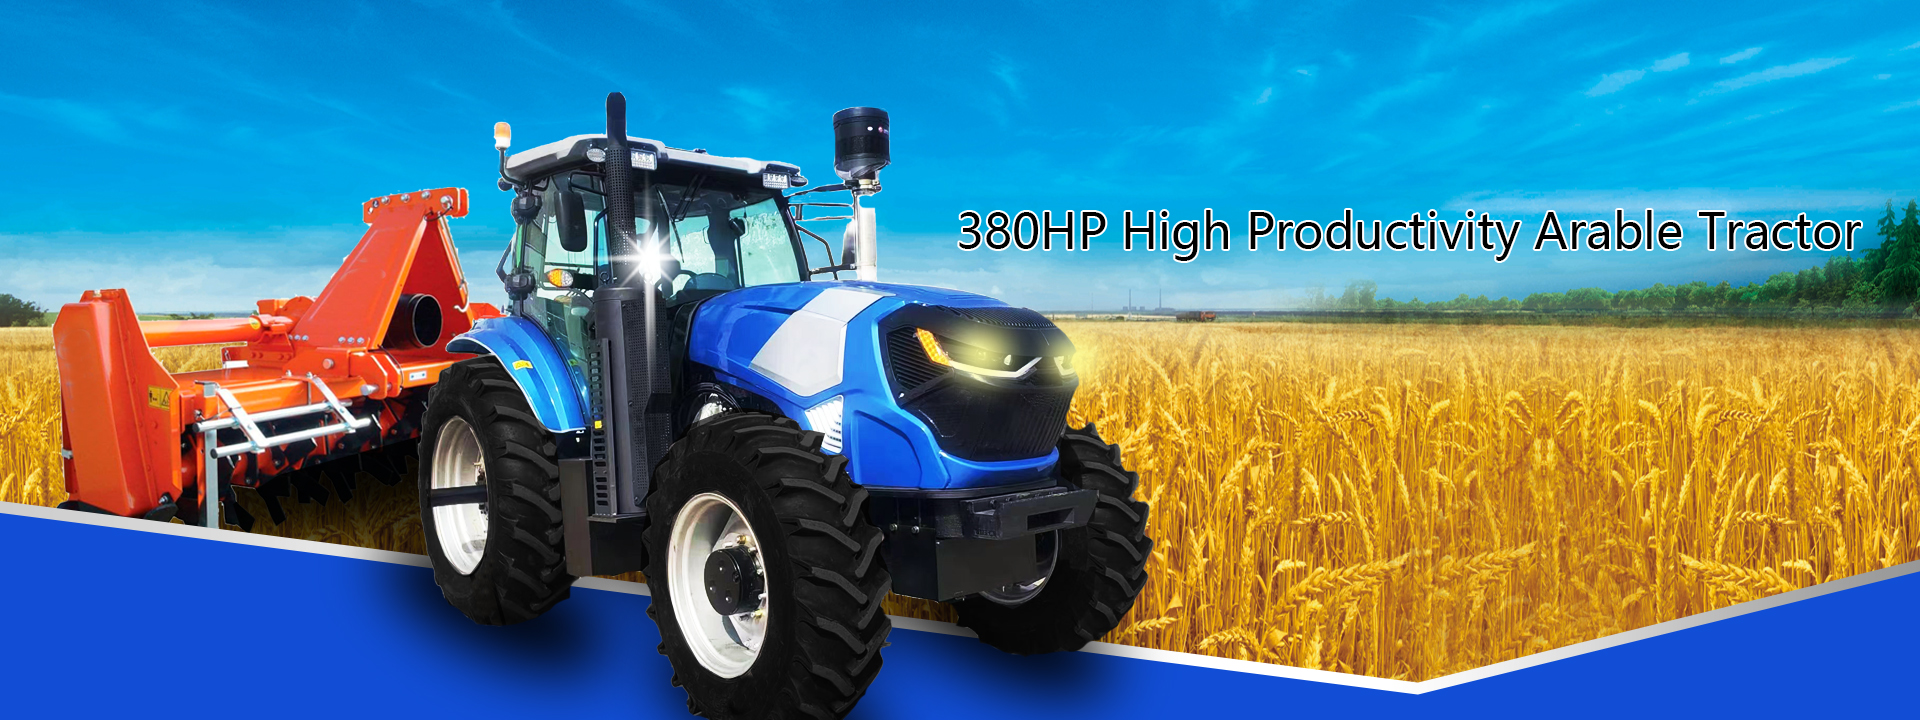 380HP High Productivity Arable Tractor